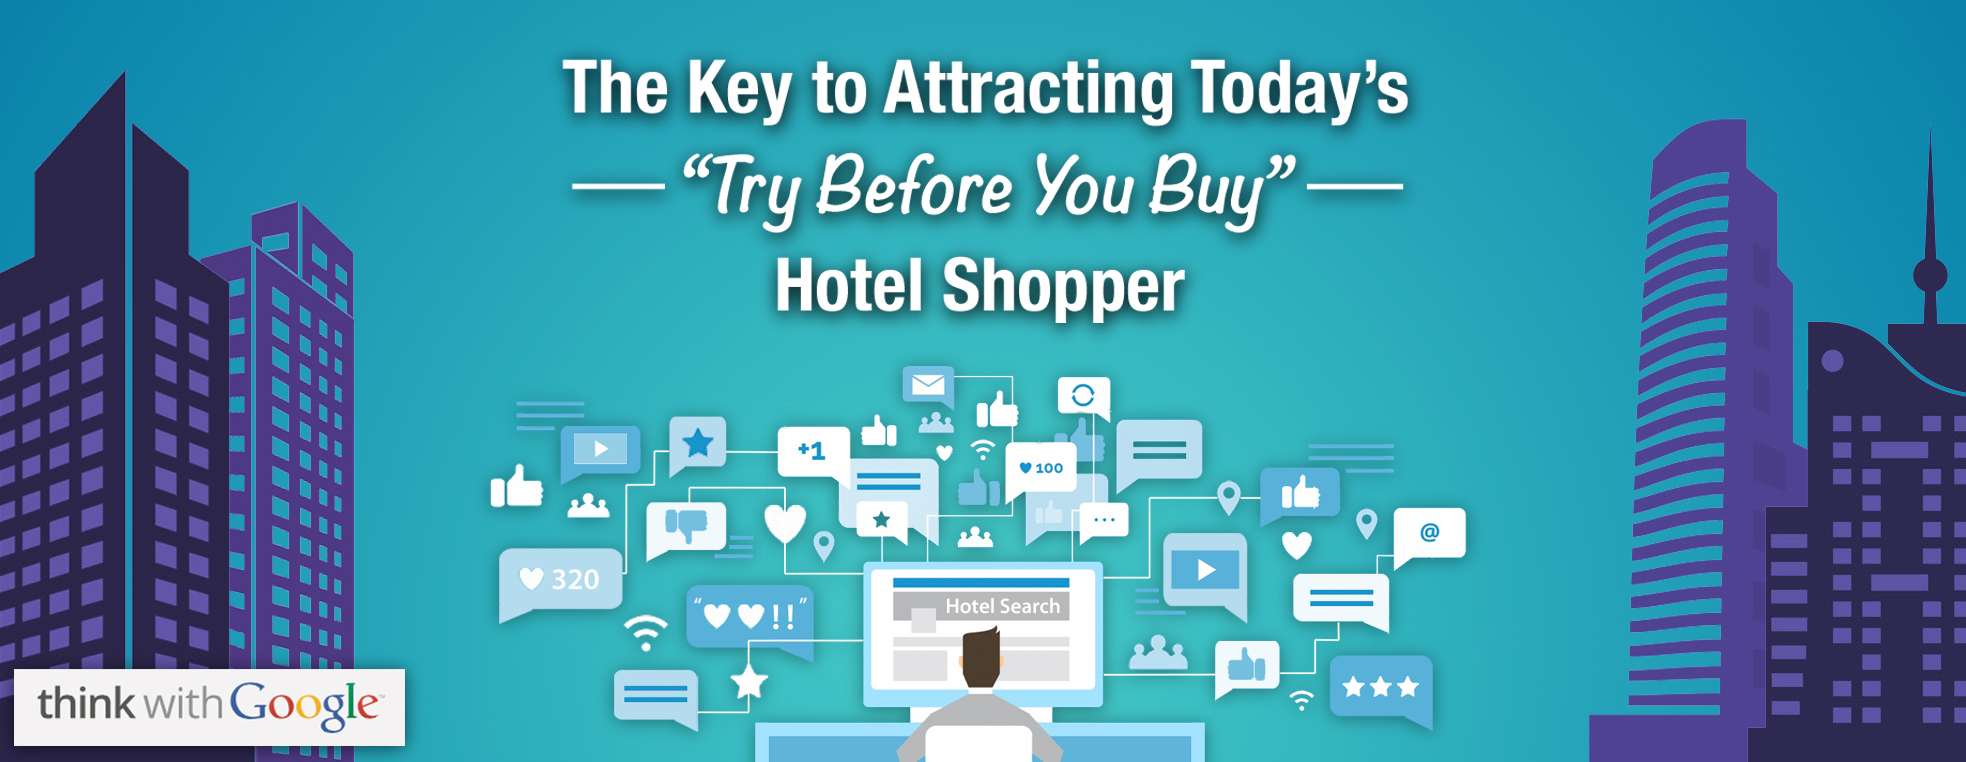 The Key to Attracting Today's "Try Before You Buy" Hotel Shopper